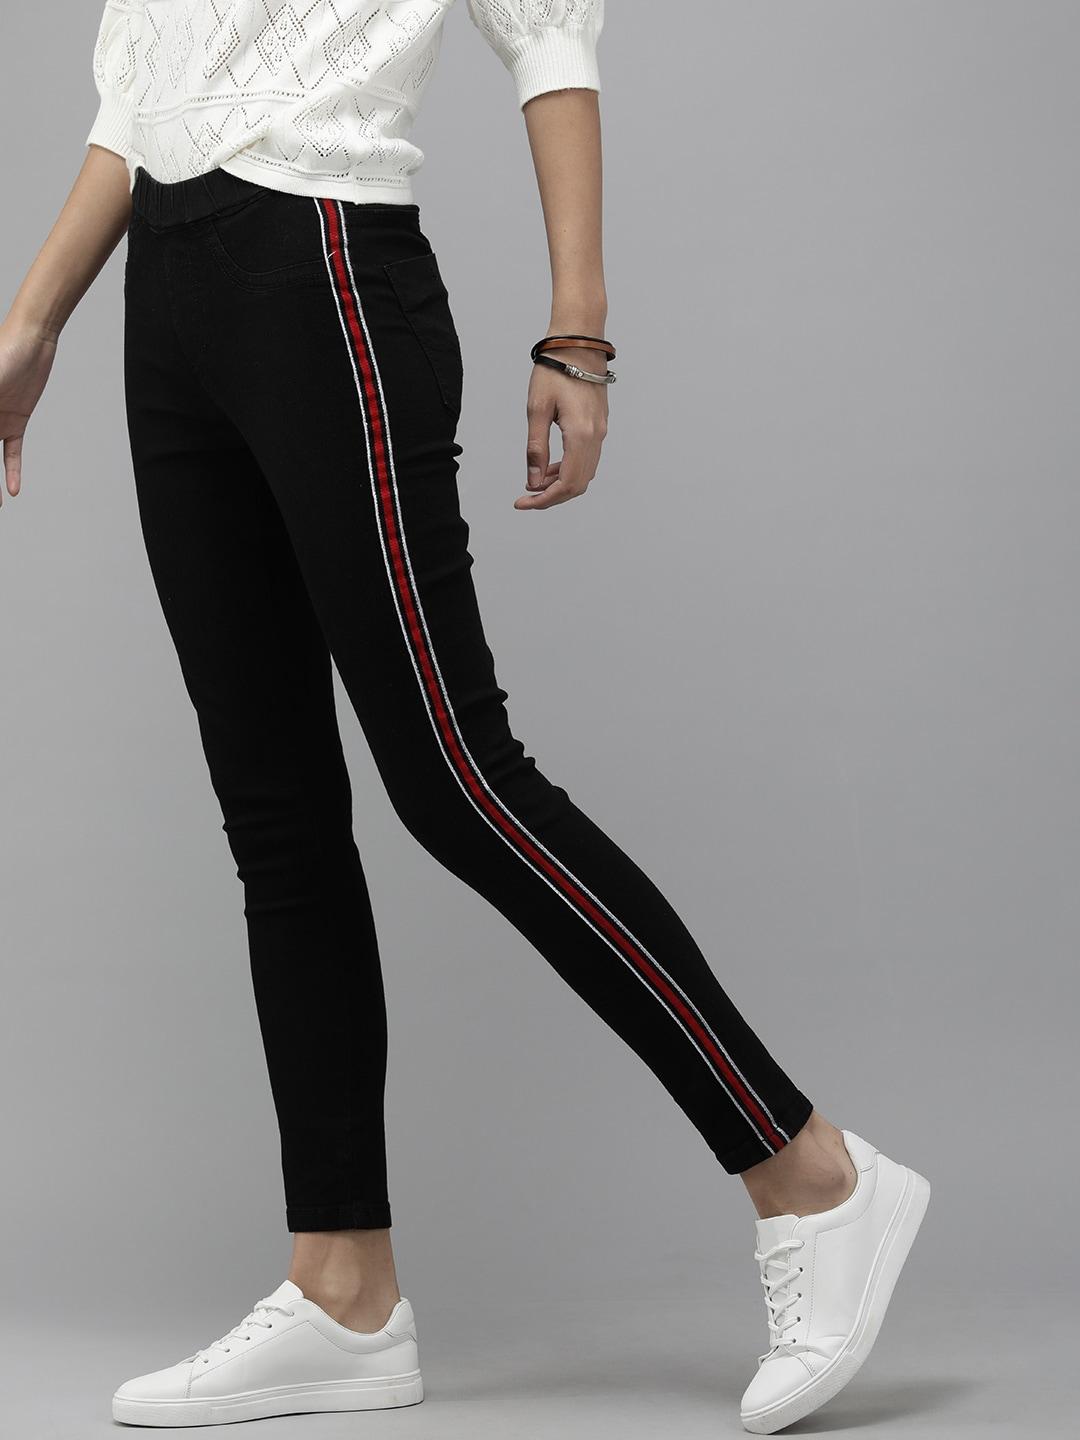 Roadster Women Black & Red Side Taped Ankle Length Skinny Fit Jeggings